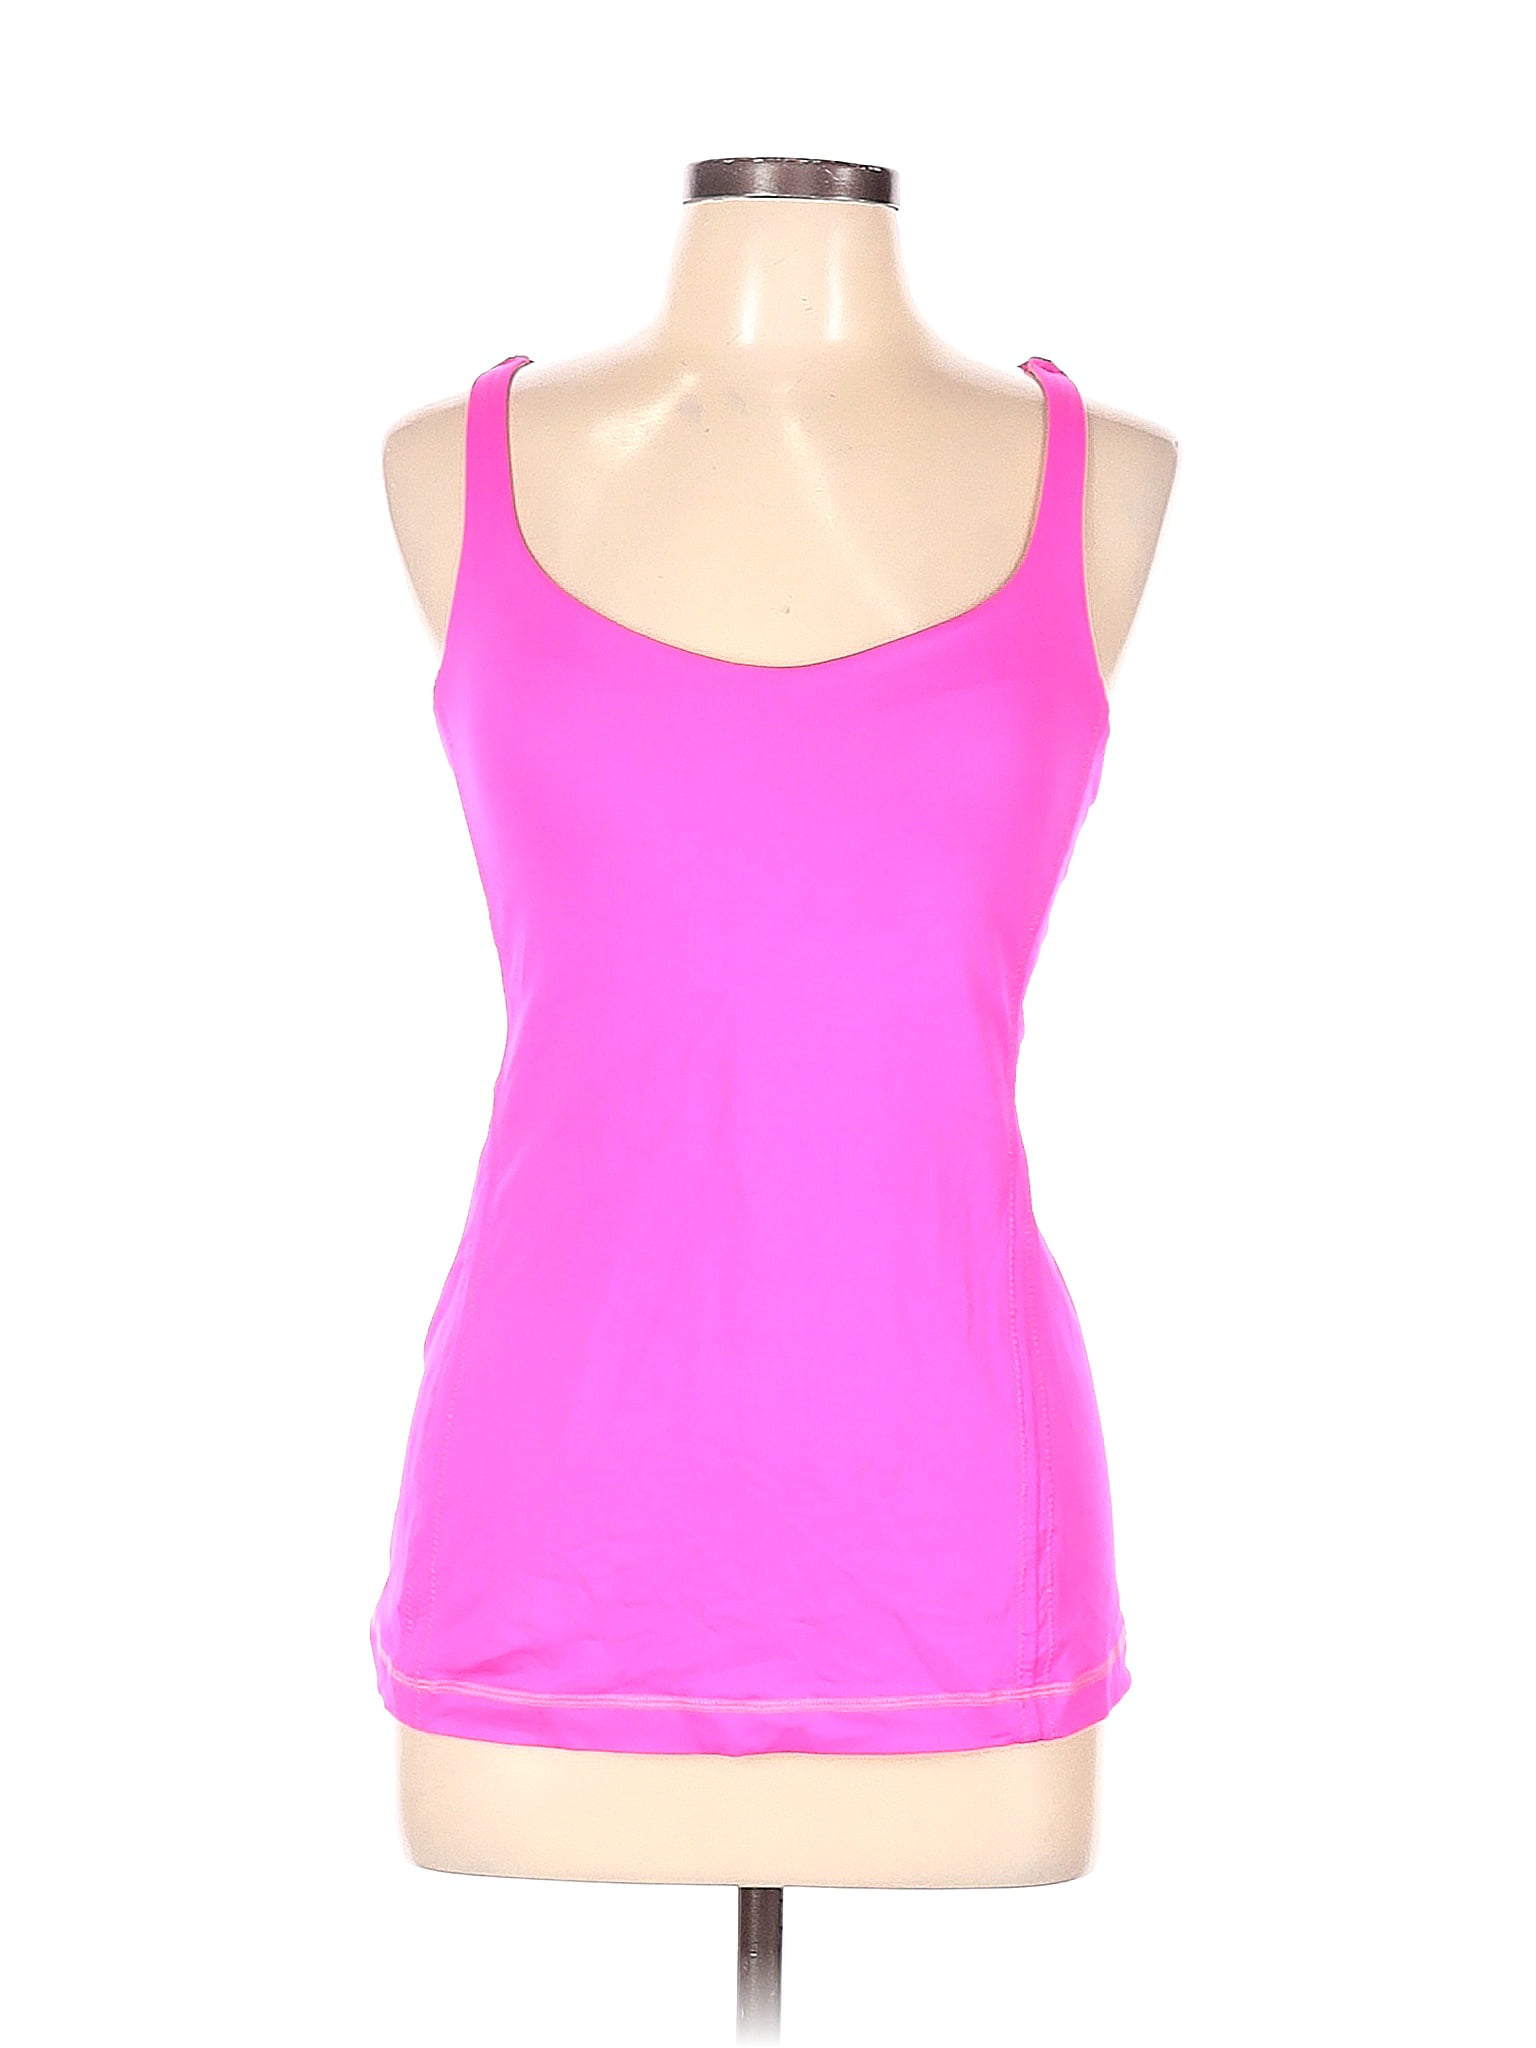 Pre-Owned Lululemon Athletica Womens Size 10 Active Tank